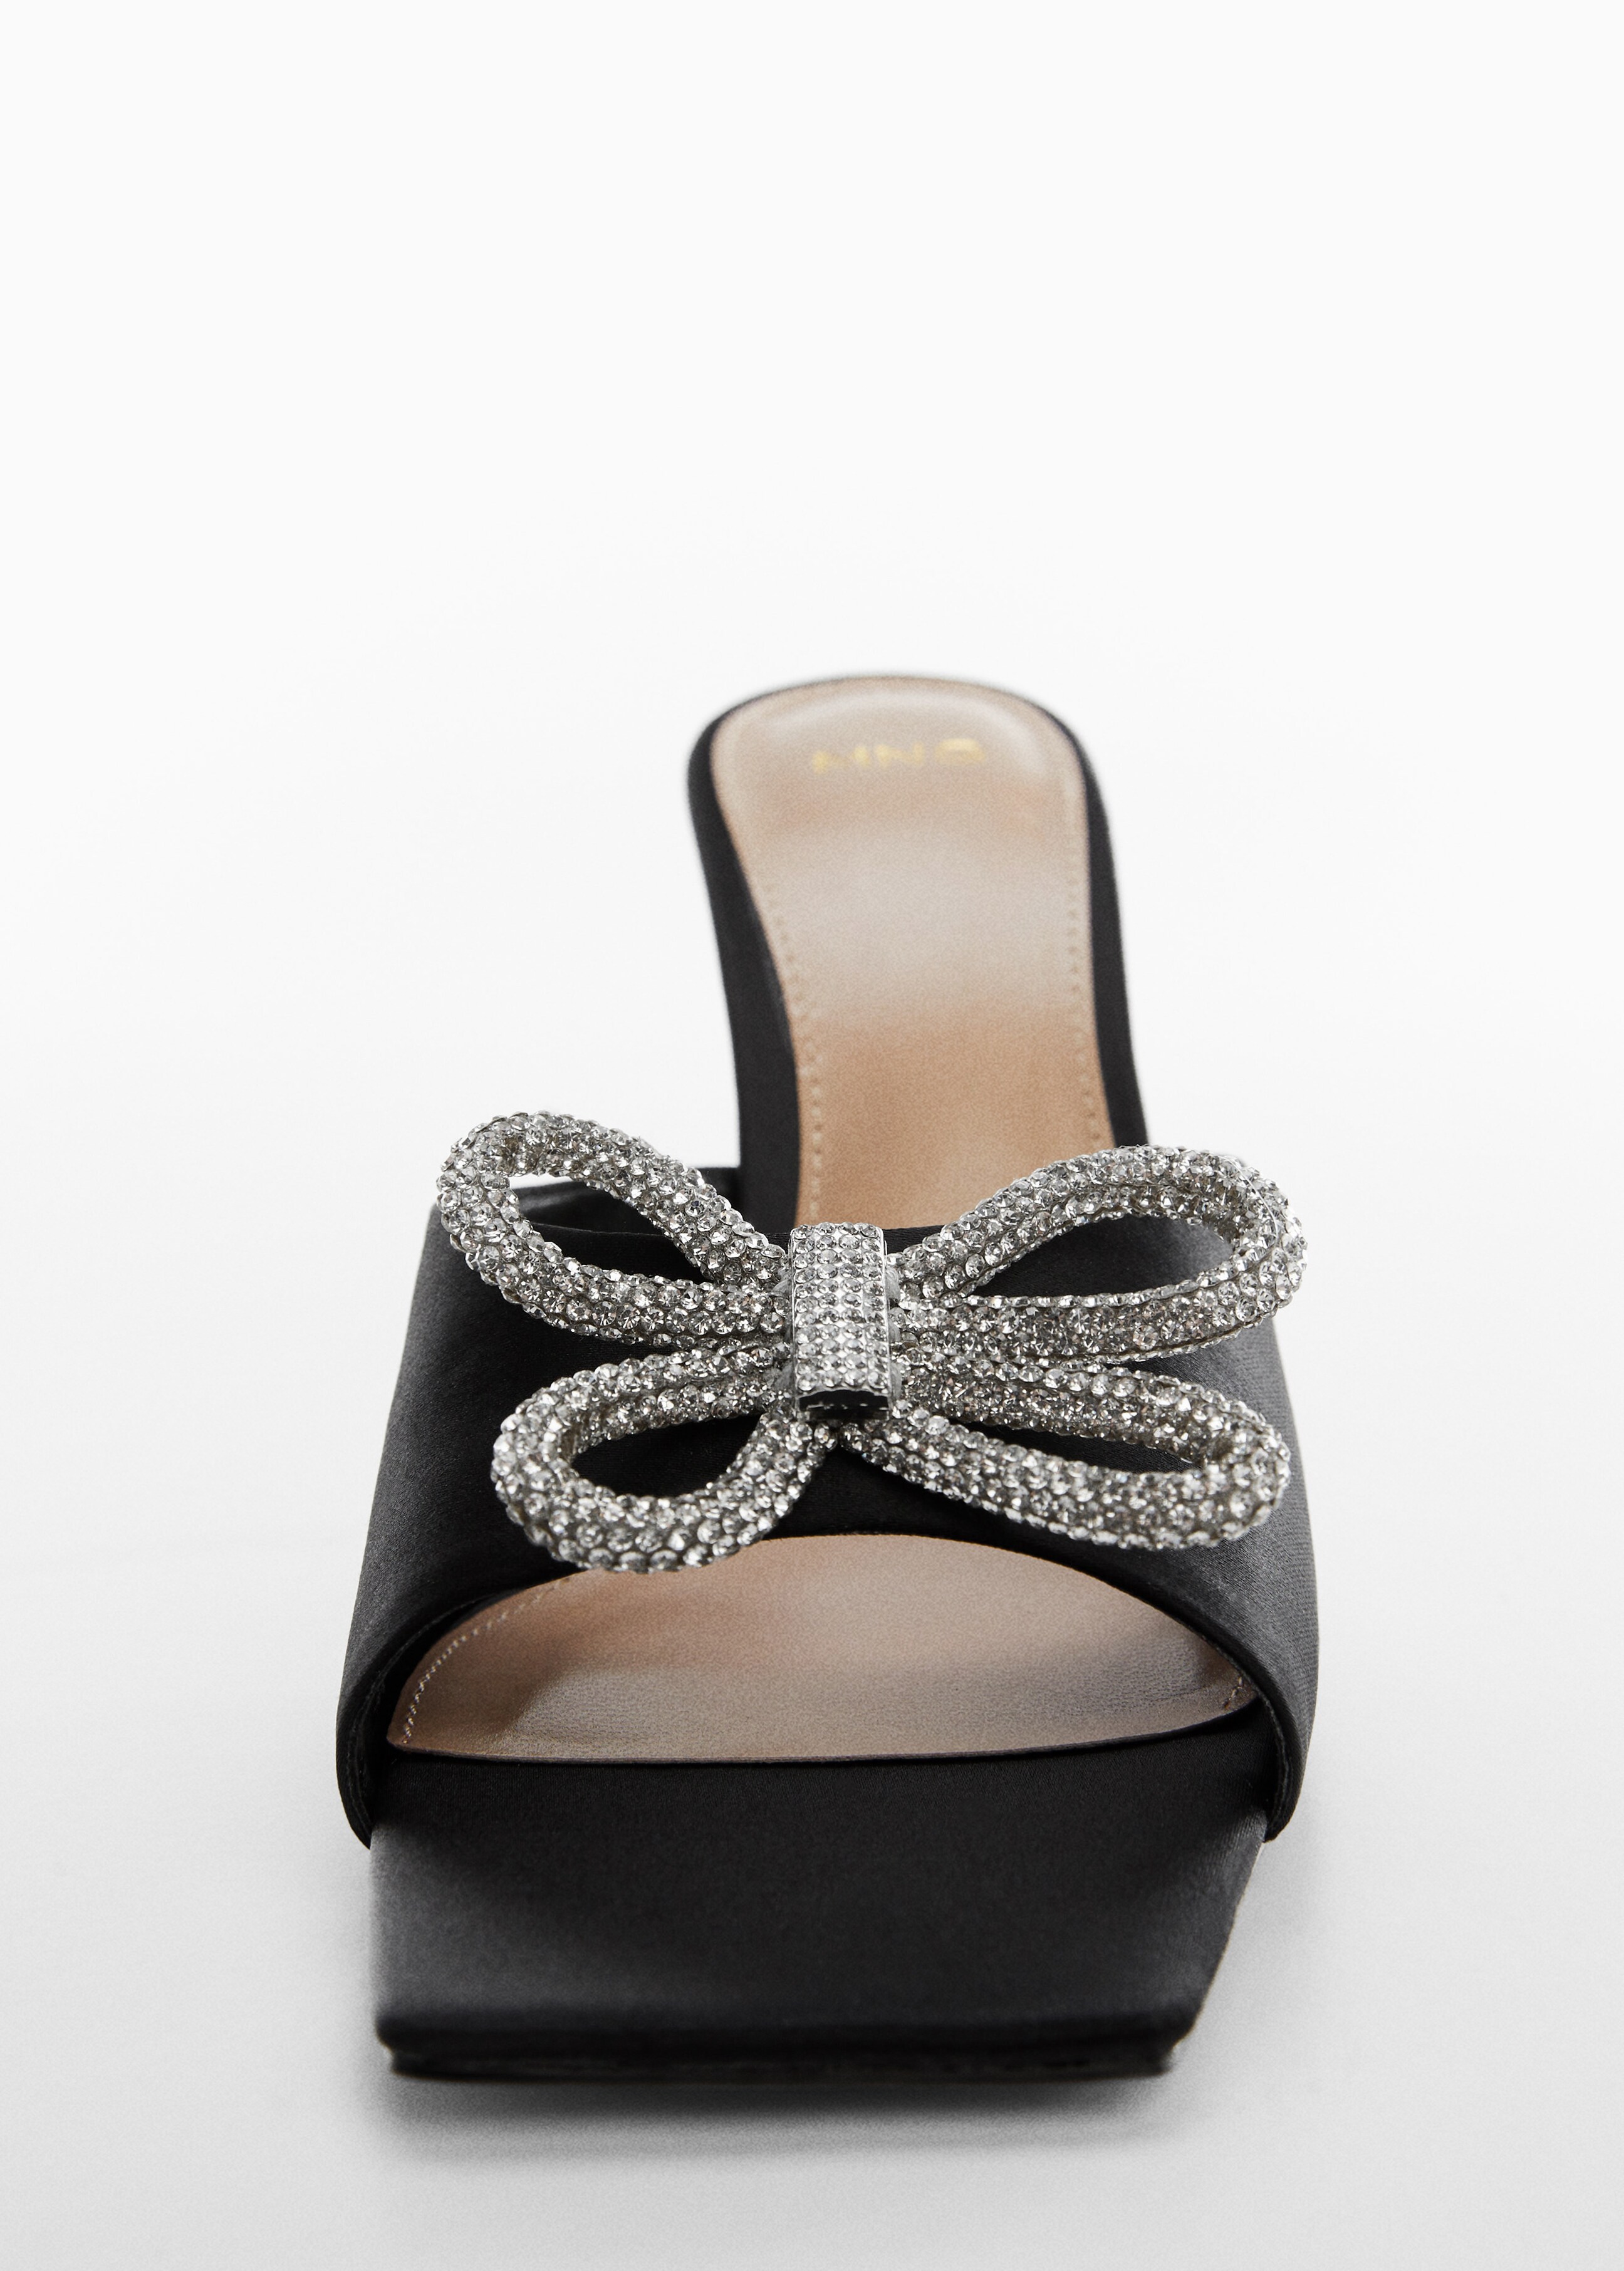 Heeled sandals with rhinestone detail - Details of the article 2